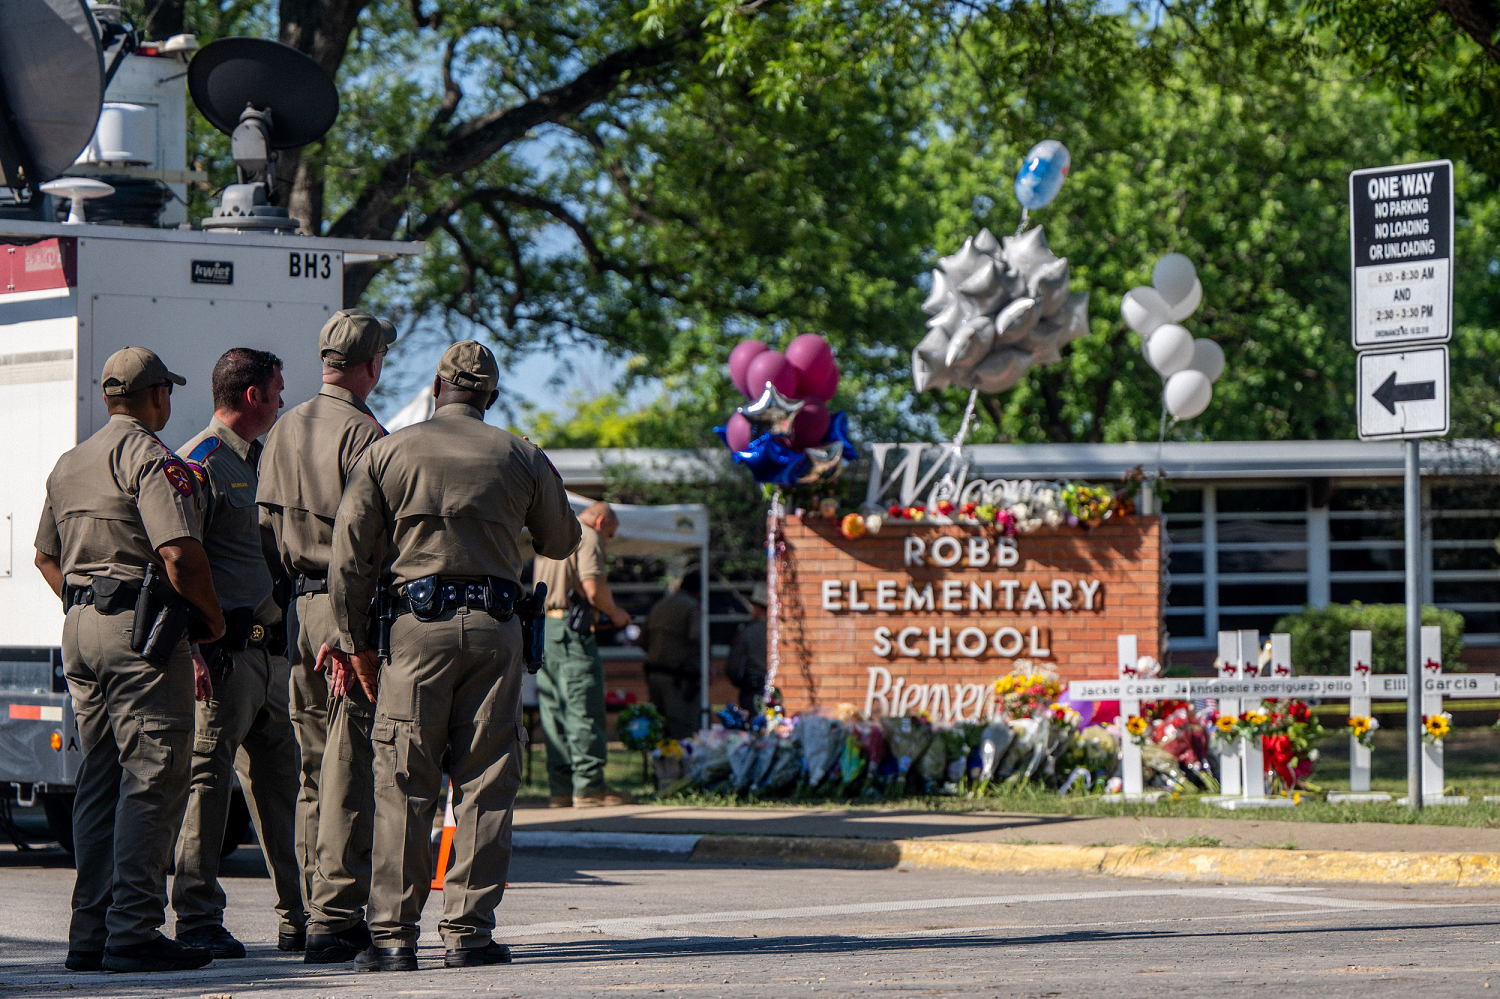 Police could have saved more lives at Robb Elementary. It's criminal that they didn't.